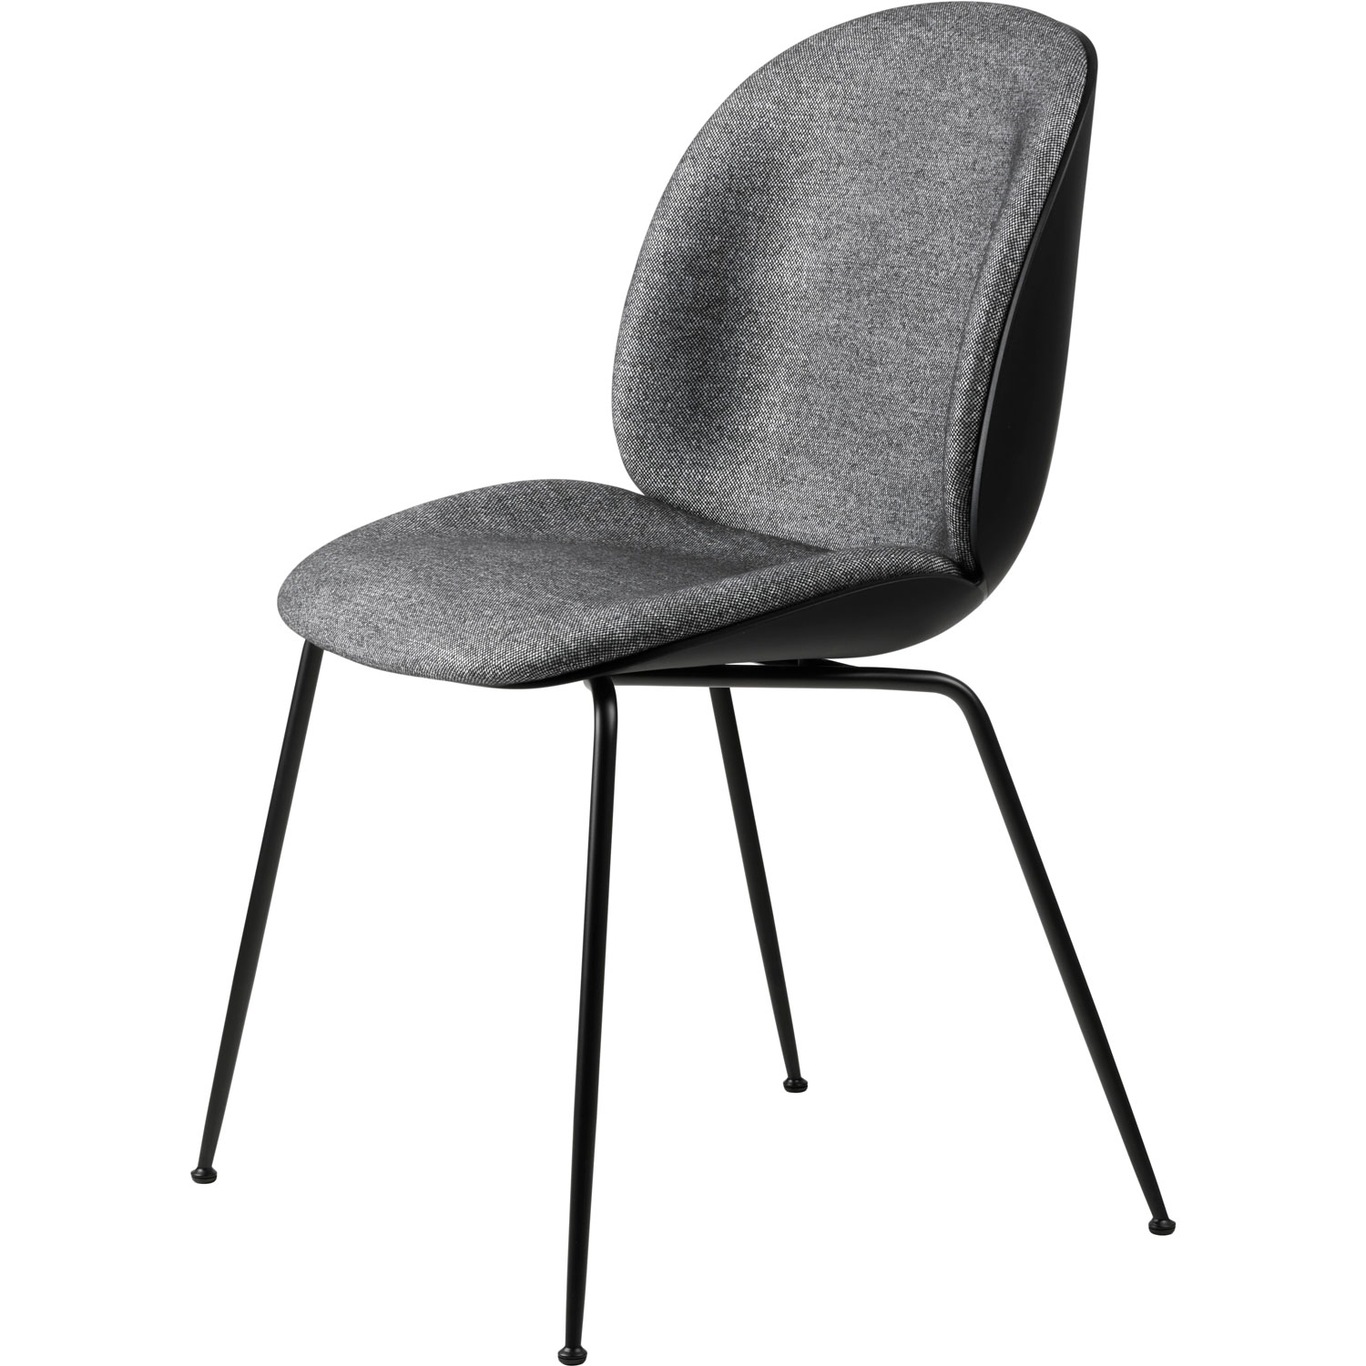 Beetle Chair Upholstered Front / Conical Base, Plain 0023